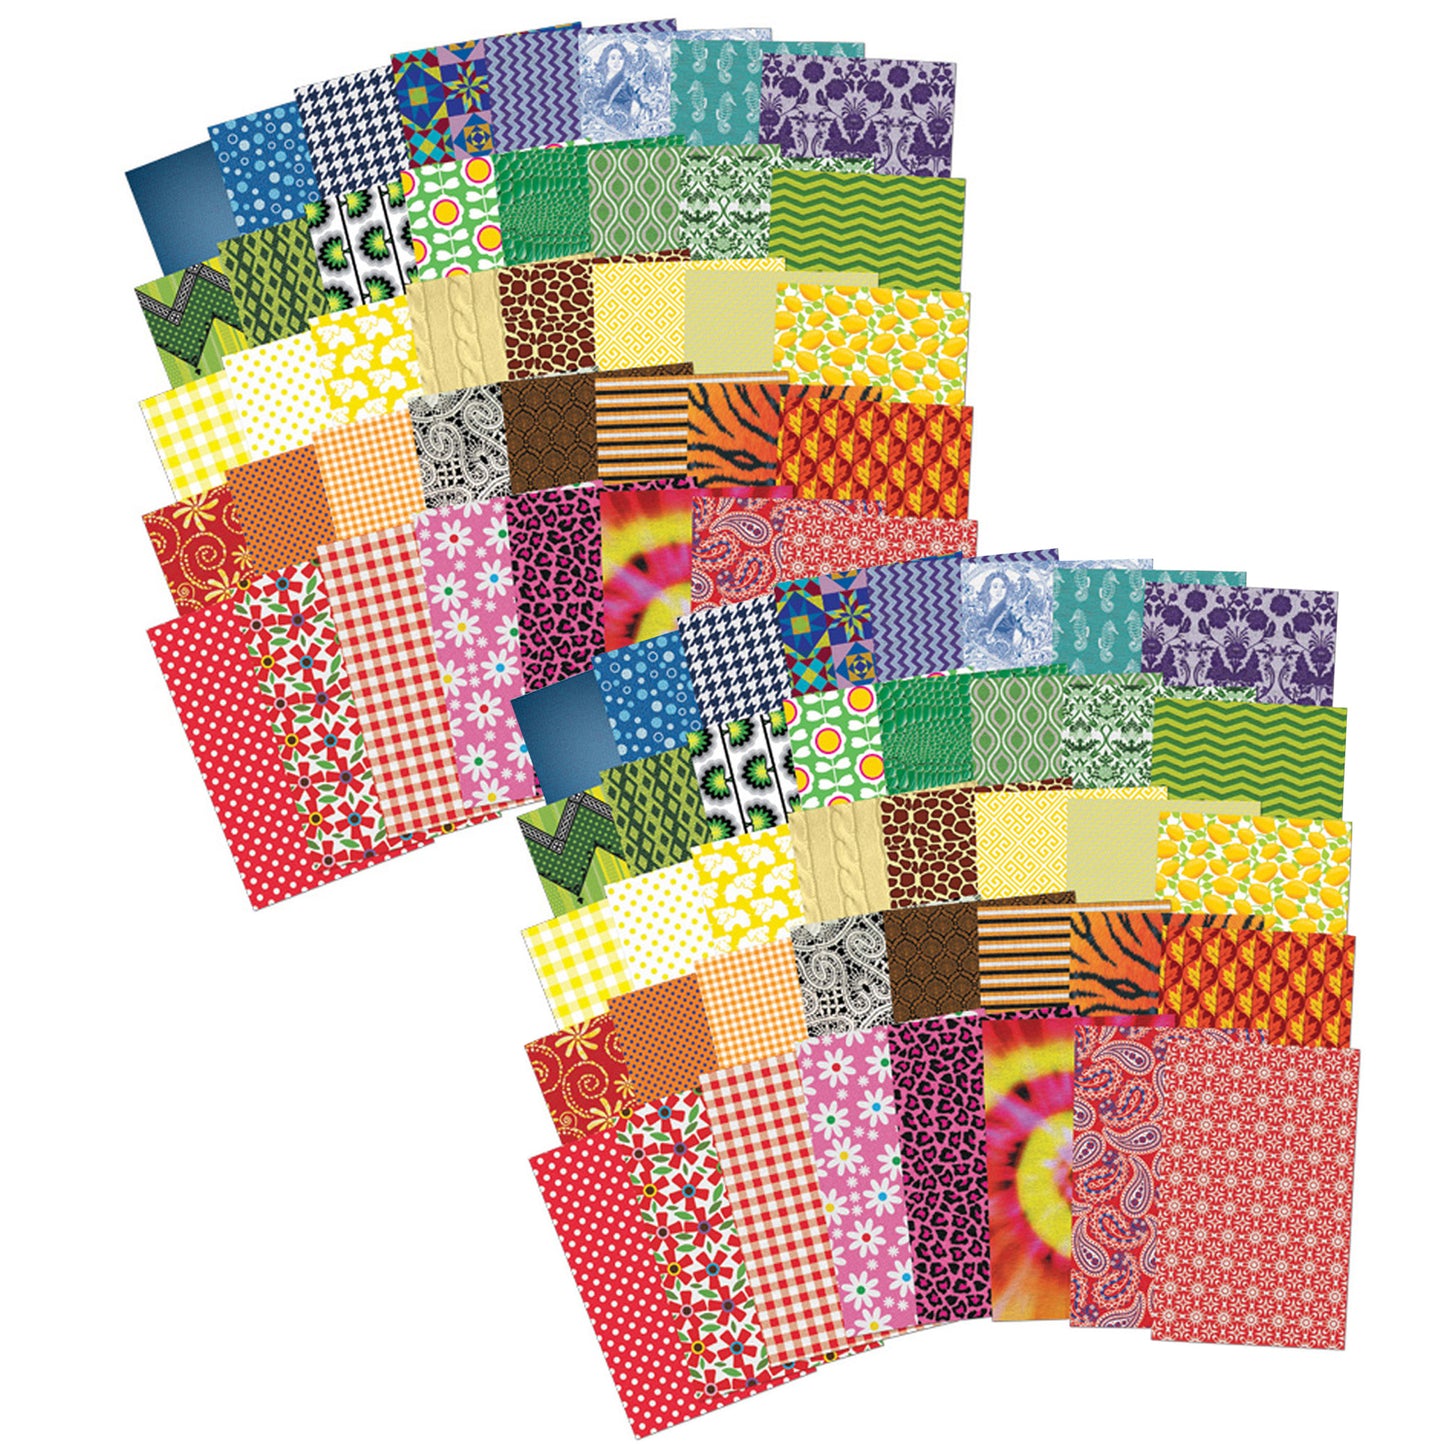 All Kinds of Fabric Design Papers™, 5.5" x 8.5", 200 Sheets Per Pack, 2 Packs